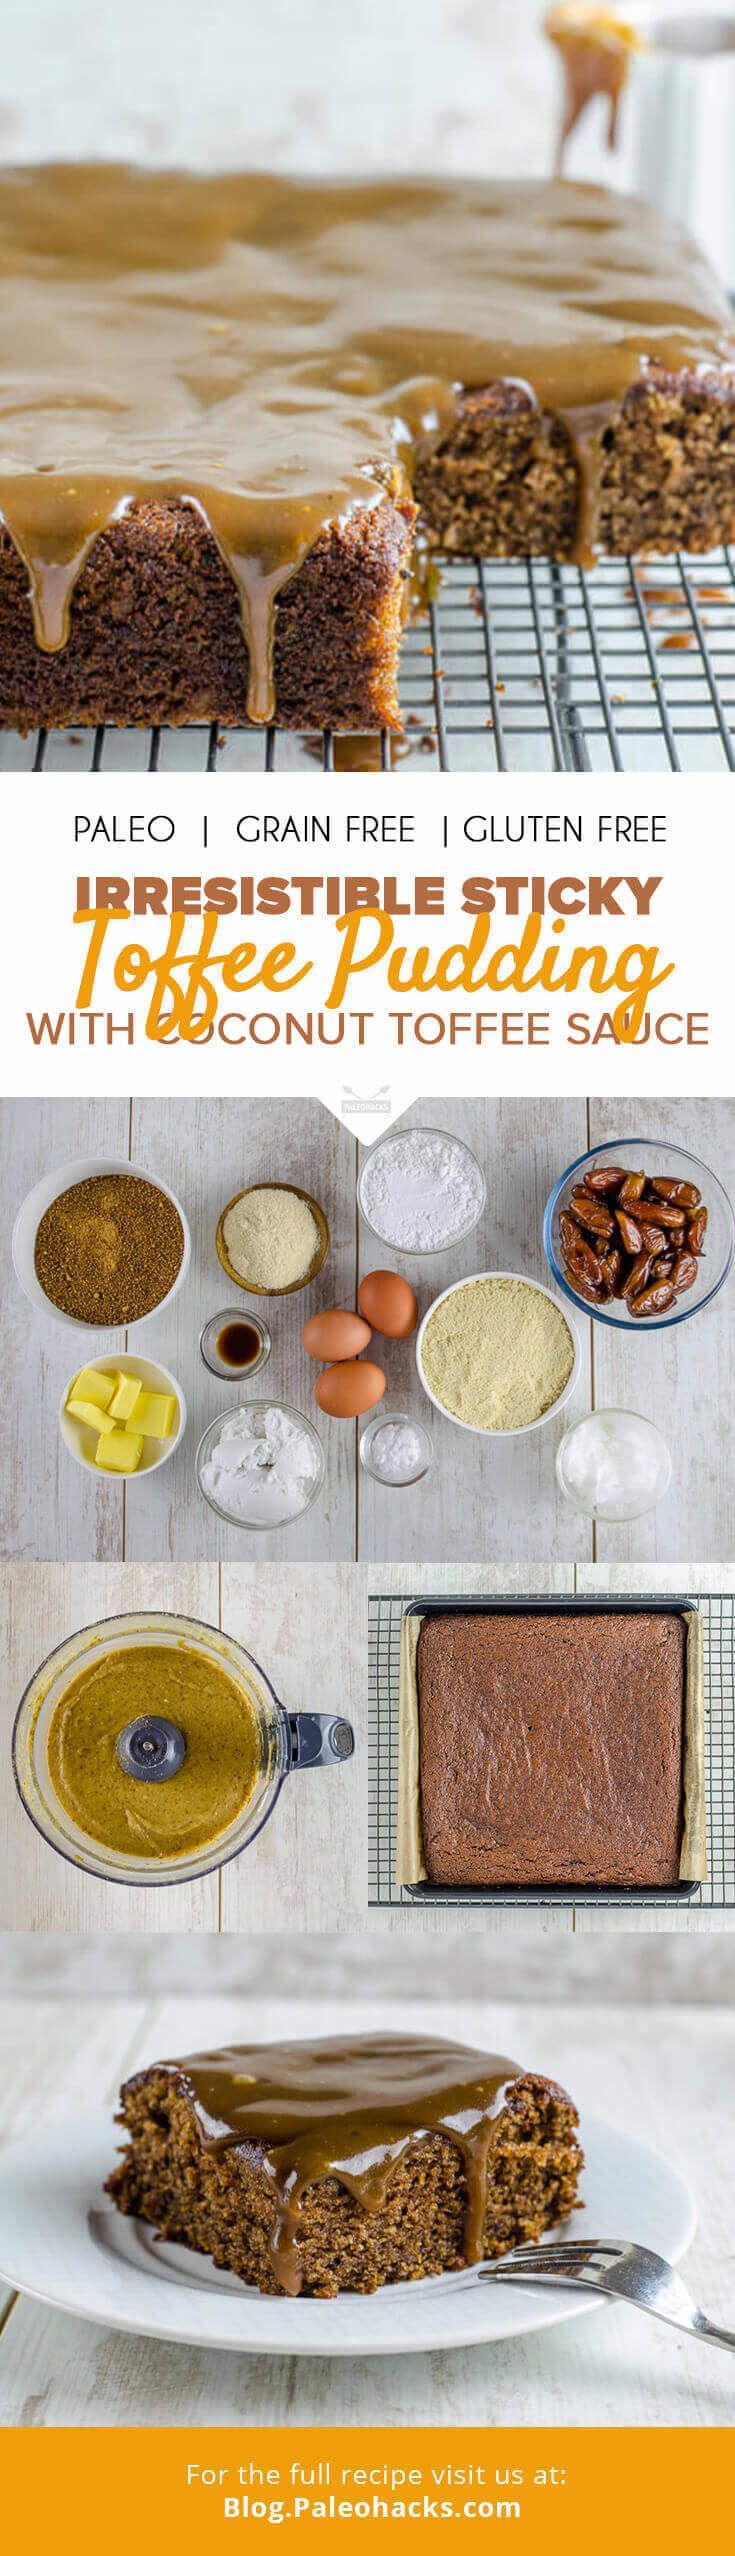 toffee pudding pin